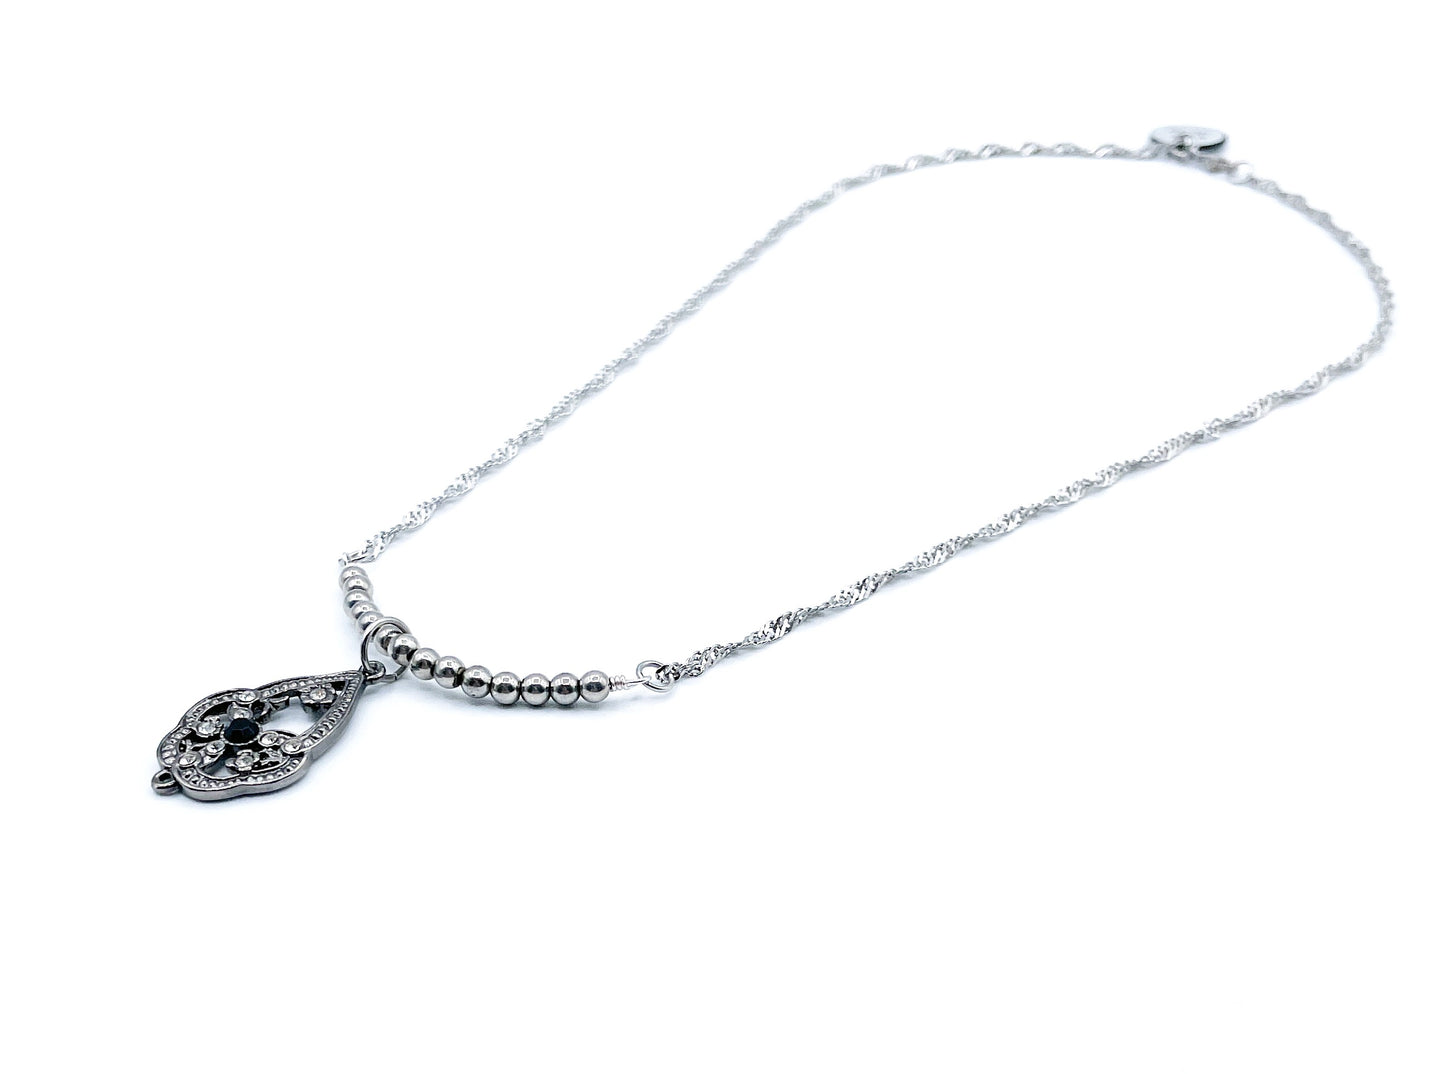 'Be The Change' Necklace-Silver